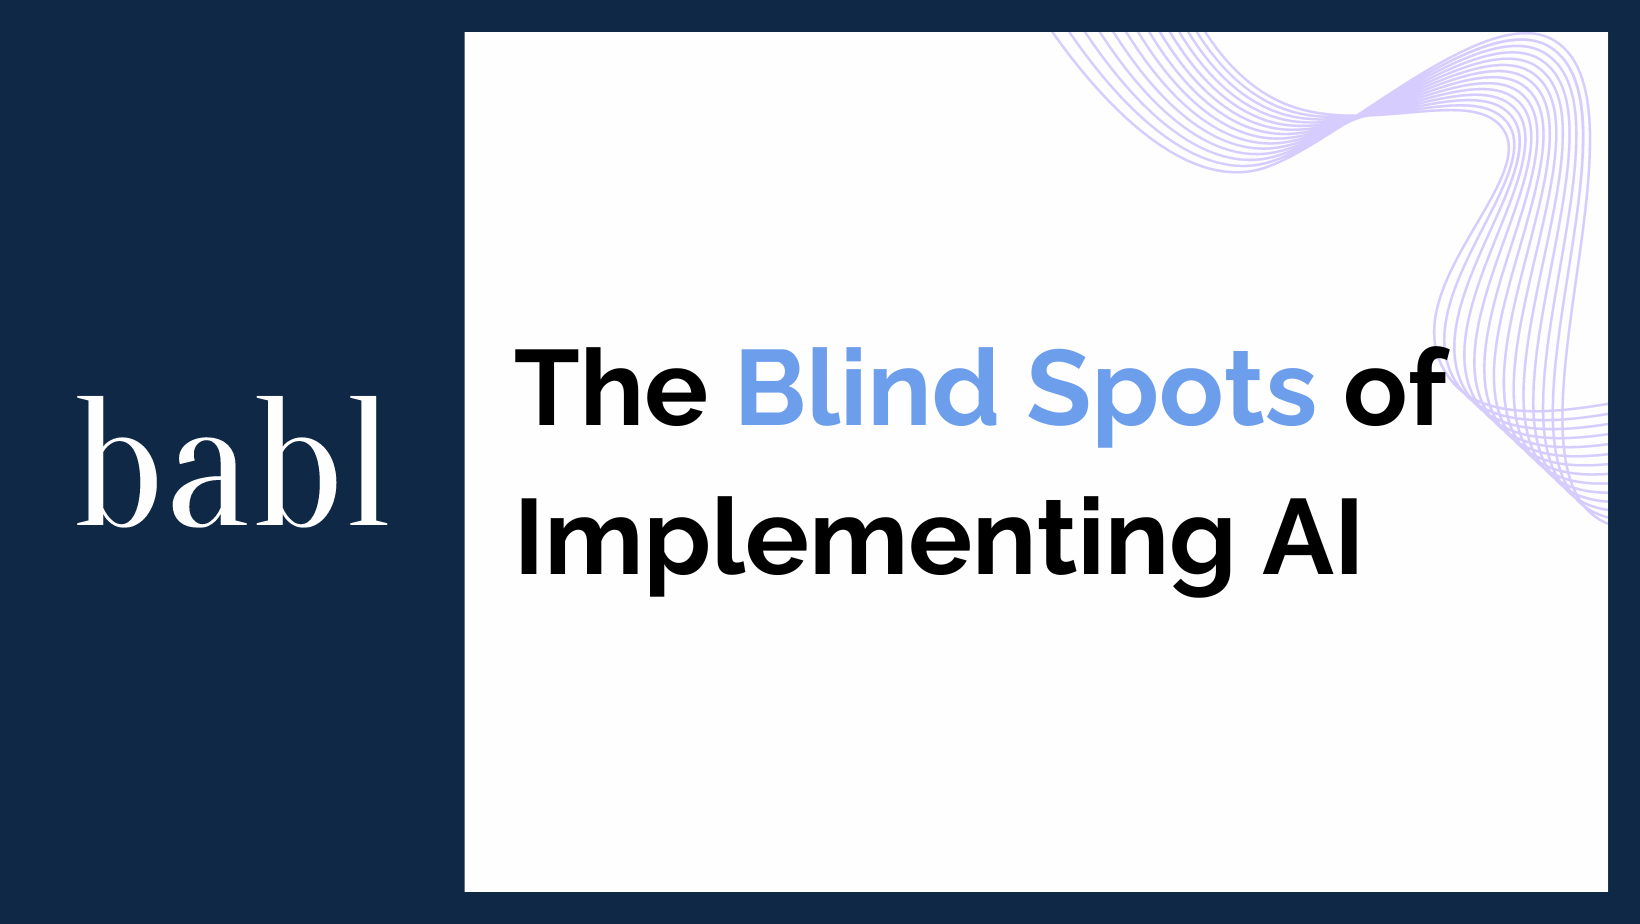 The Blind Spots of Implementing AI